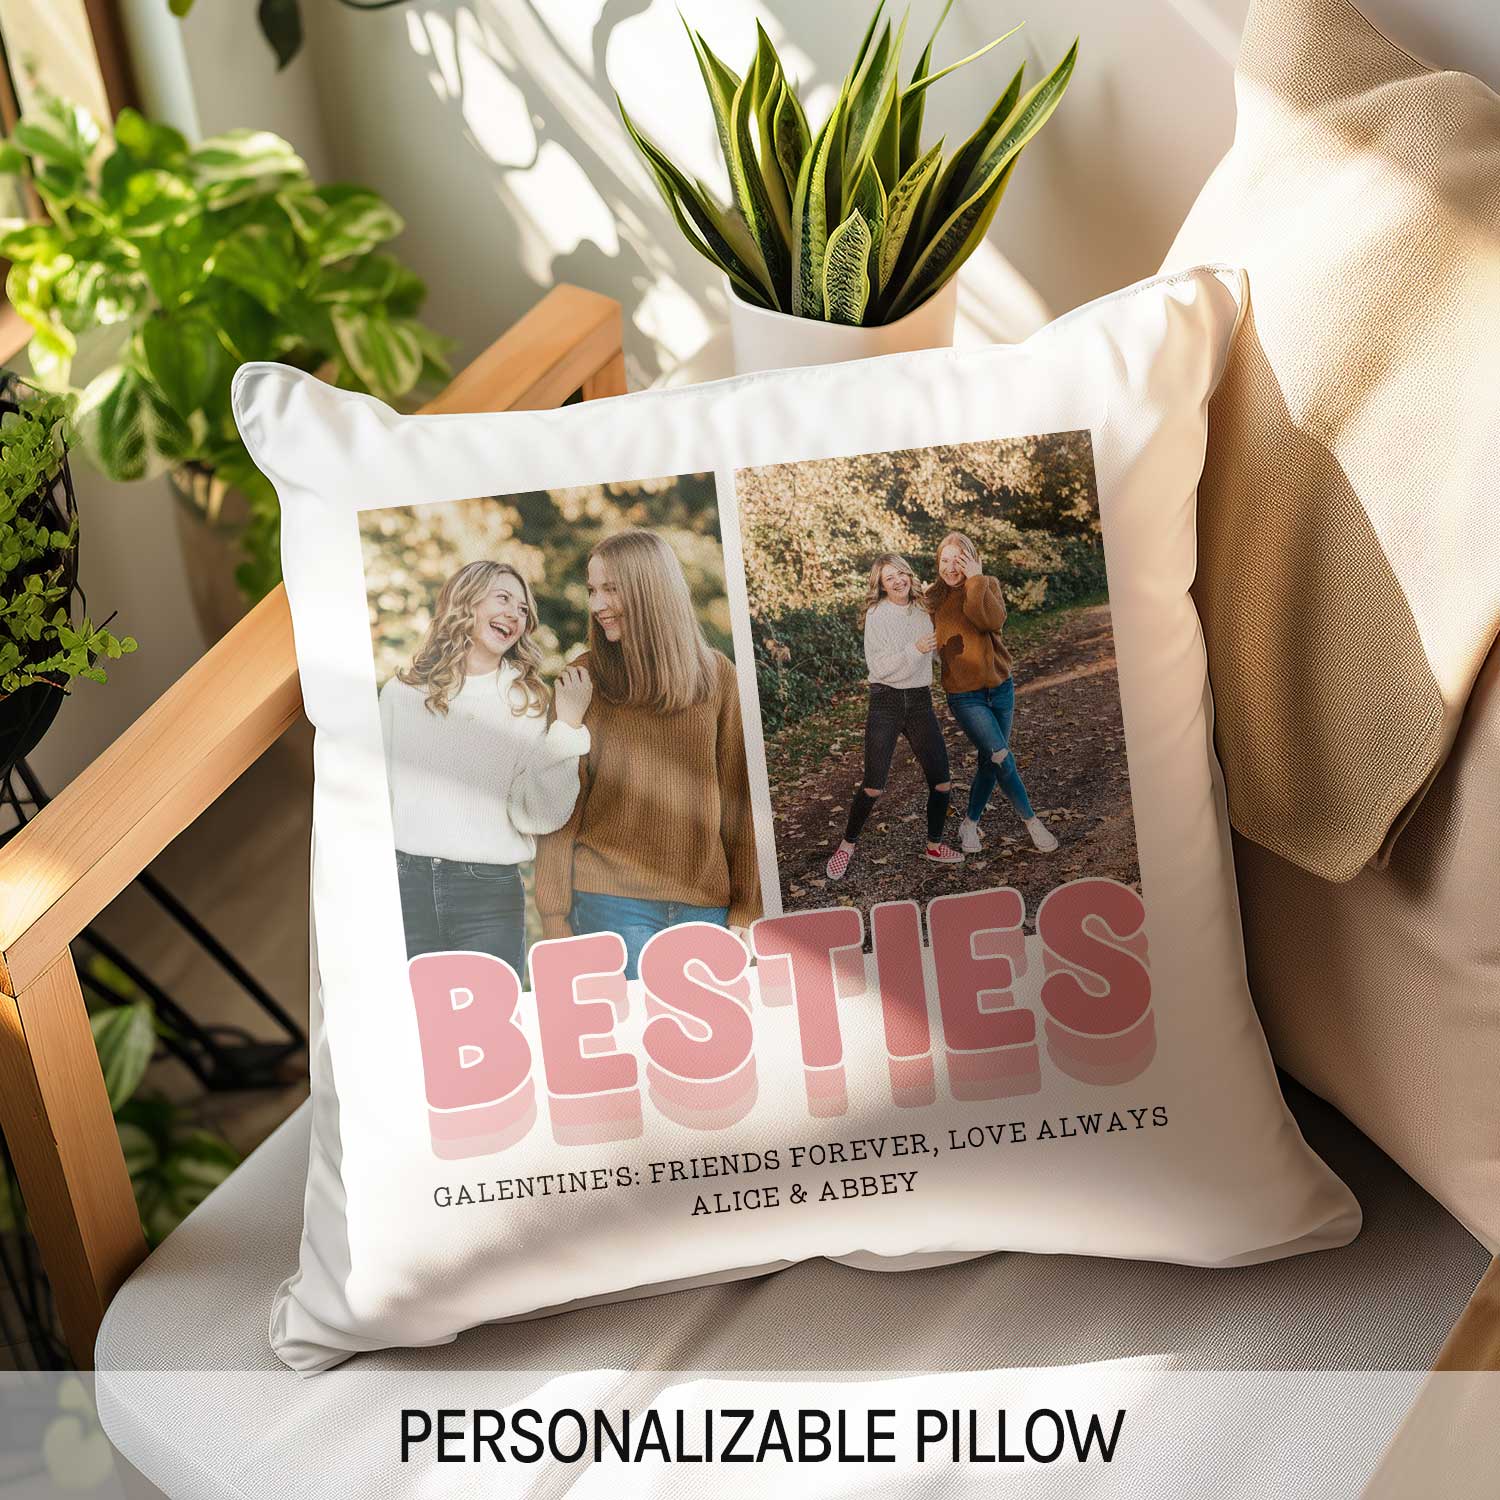 Besties - Personalized Galentine's Day gift For Friends - Custom Pillow - MyMindfulGifts